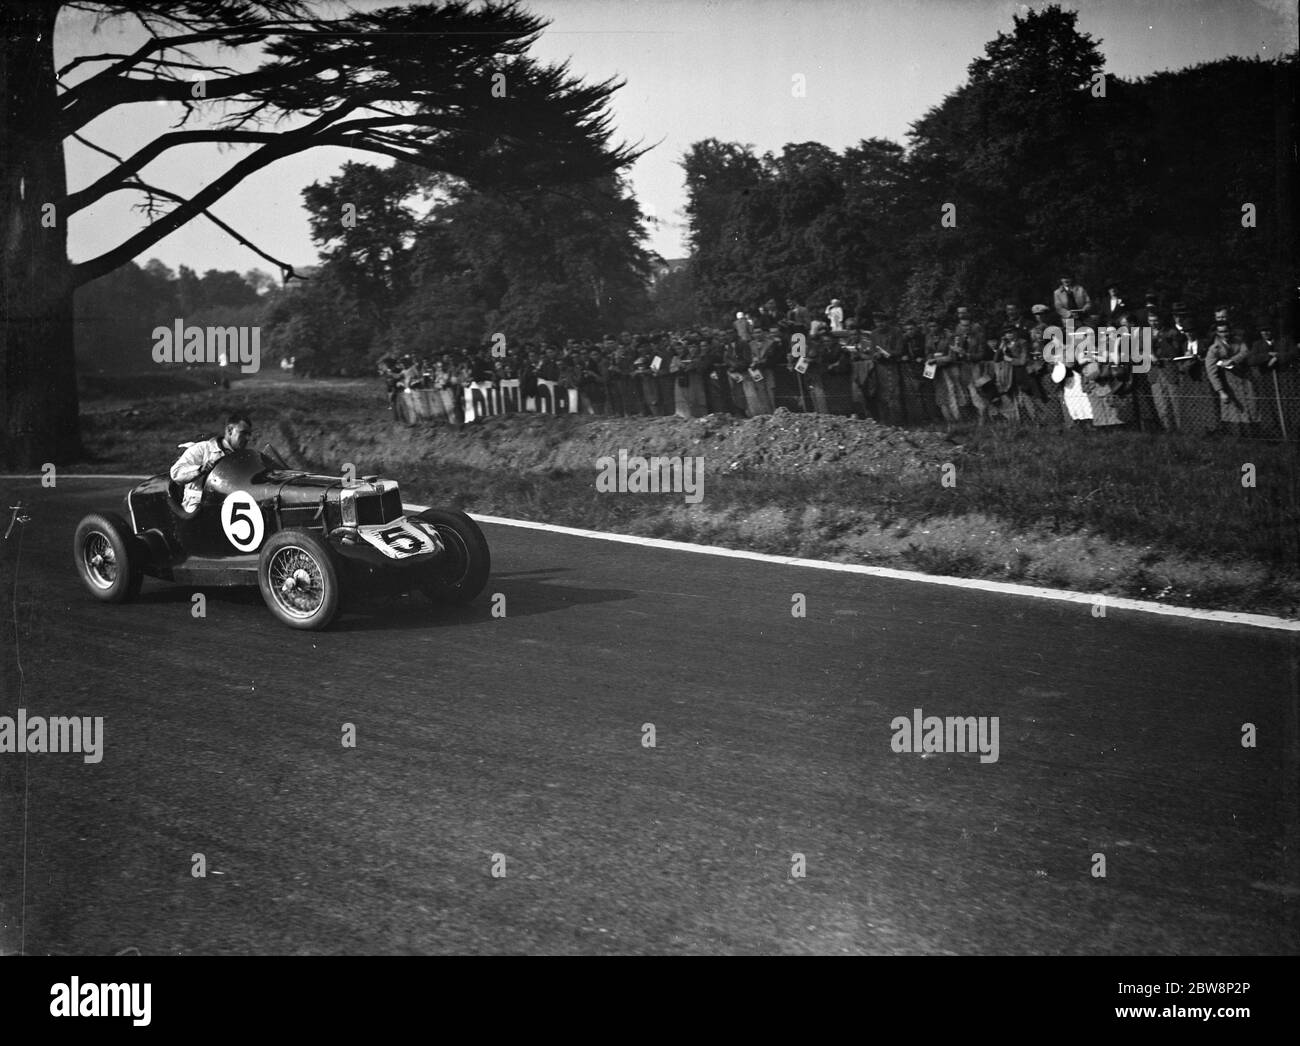 H L Brooke in his MG compete during the Crystal Palace road race . 1938 Stock Photo